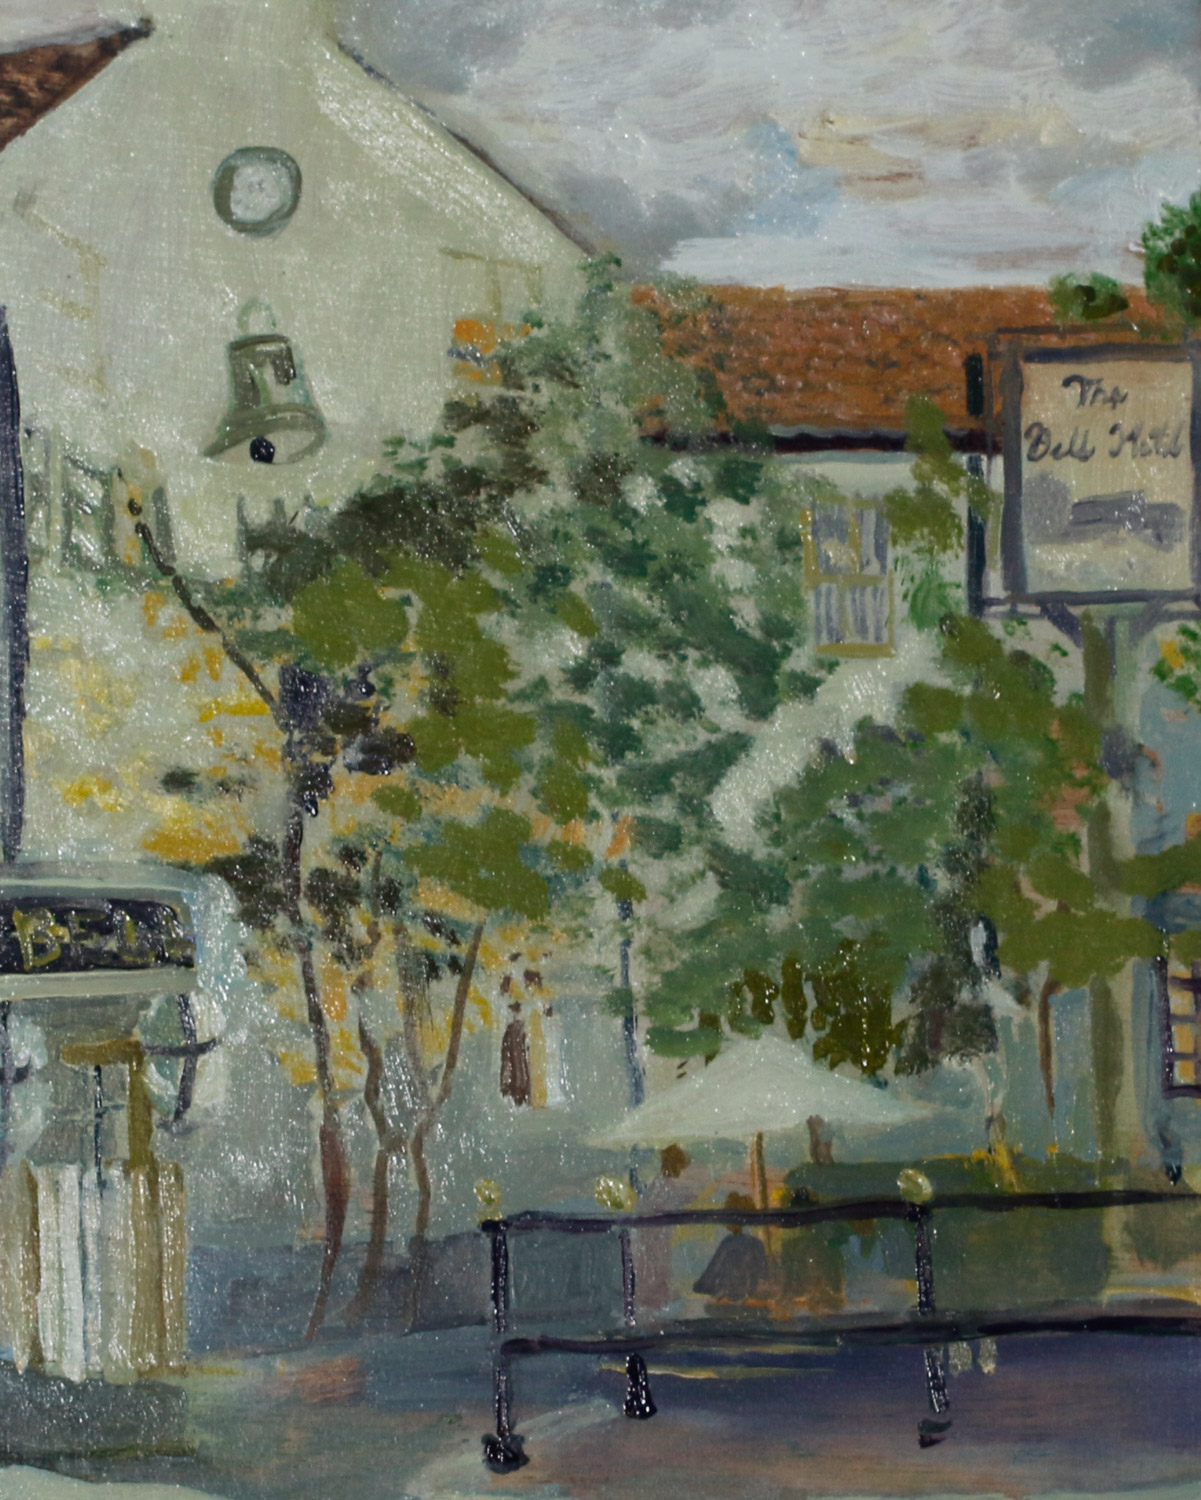 Artist Susan Mann - Wringing Wet at the Bell Hotel, £300 8x10 Studio Prepared Oil on Board at Paint Out Norwich 2015